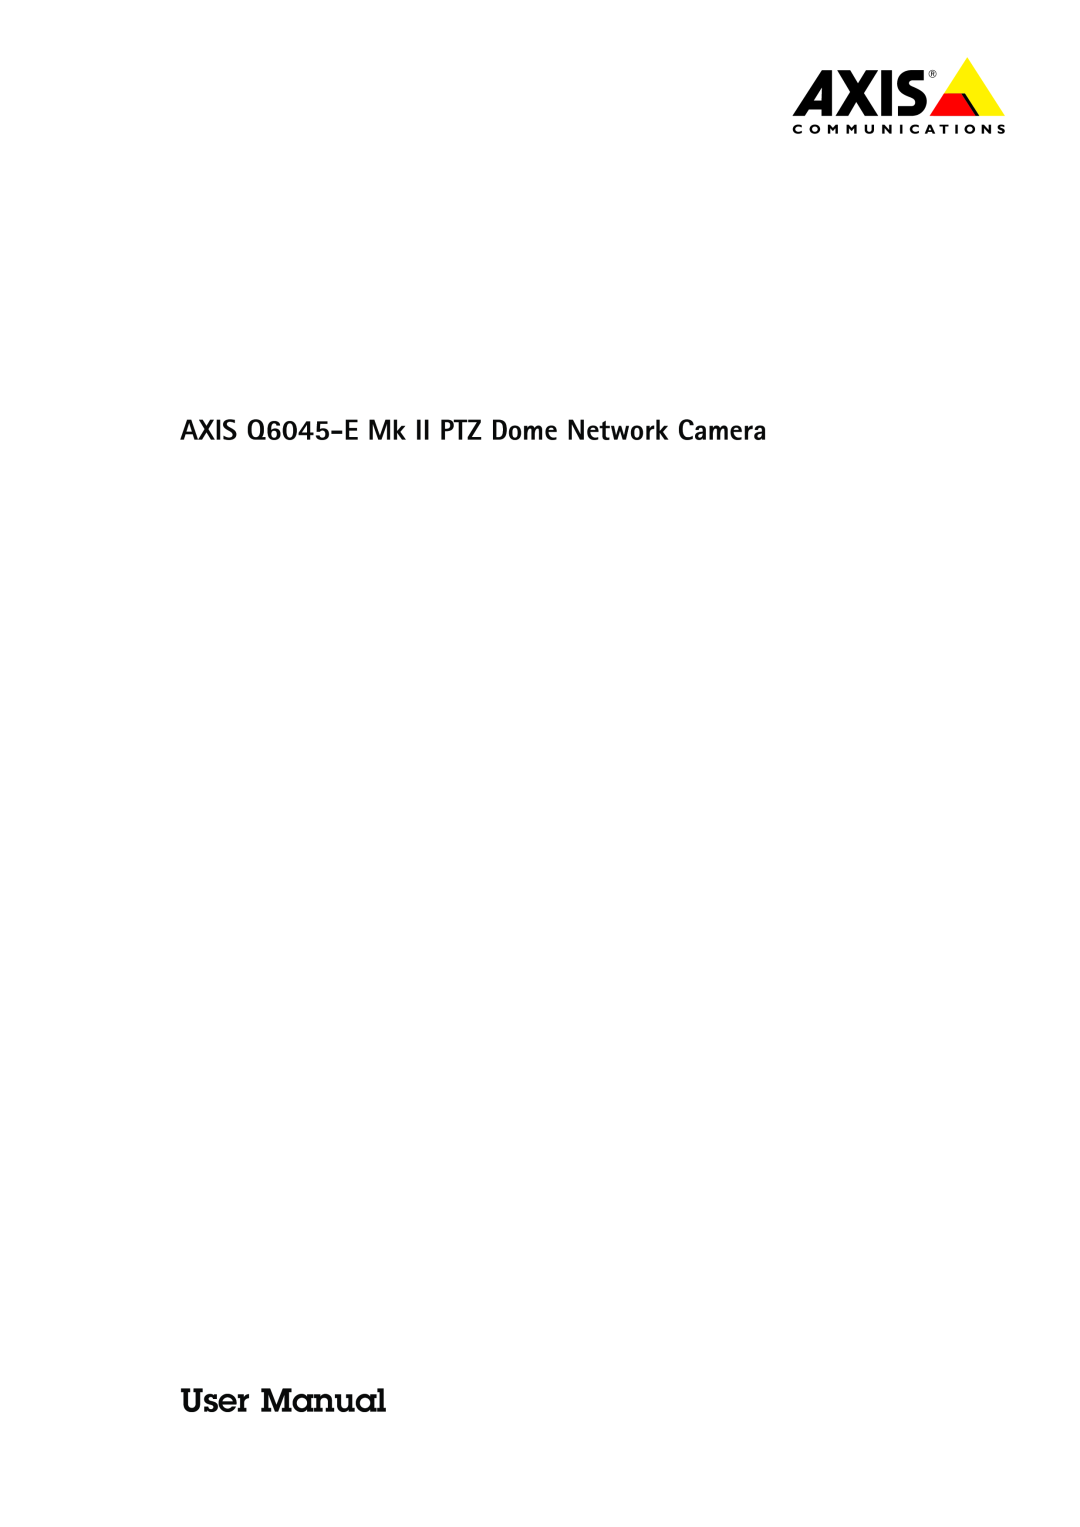 Axis Communications user manual User Manual, AXIS Q6045-EPTZ Dome Network Camera 